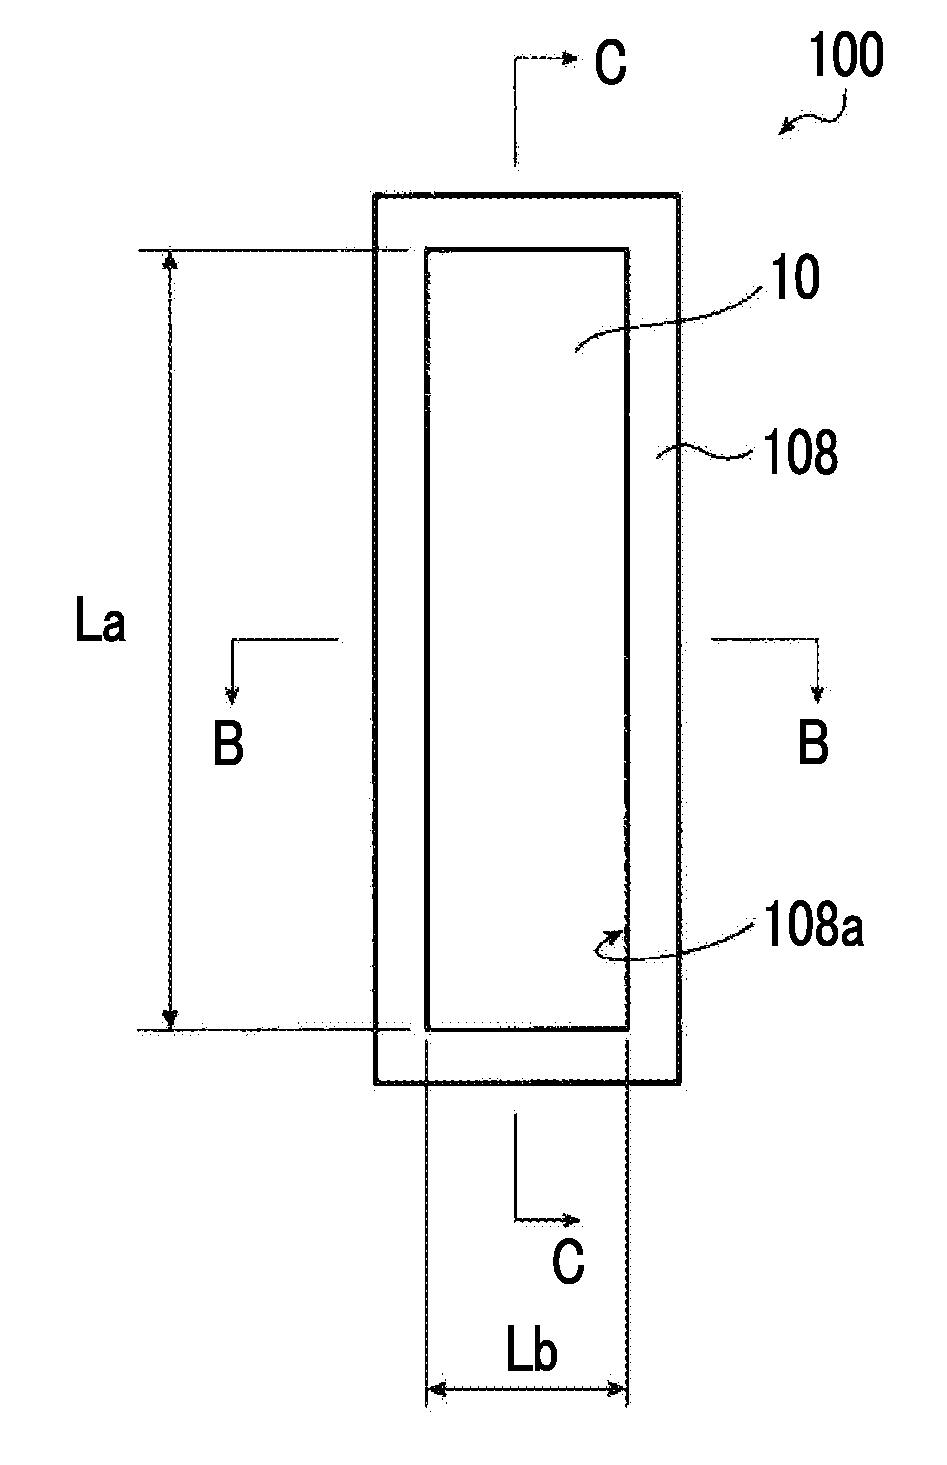 Electroacoustic transducer and electroacoustic transduction system